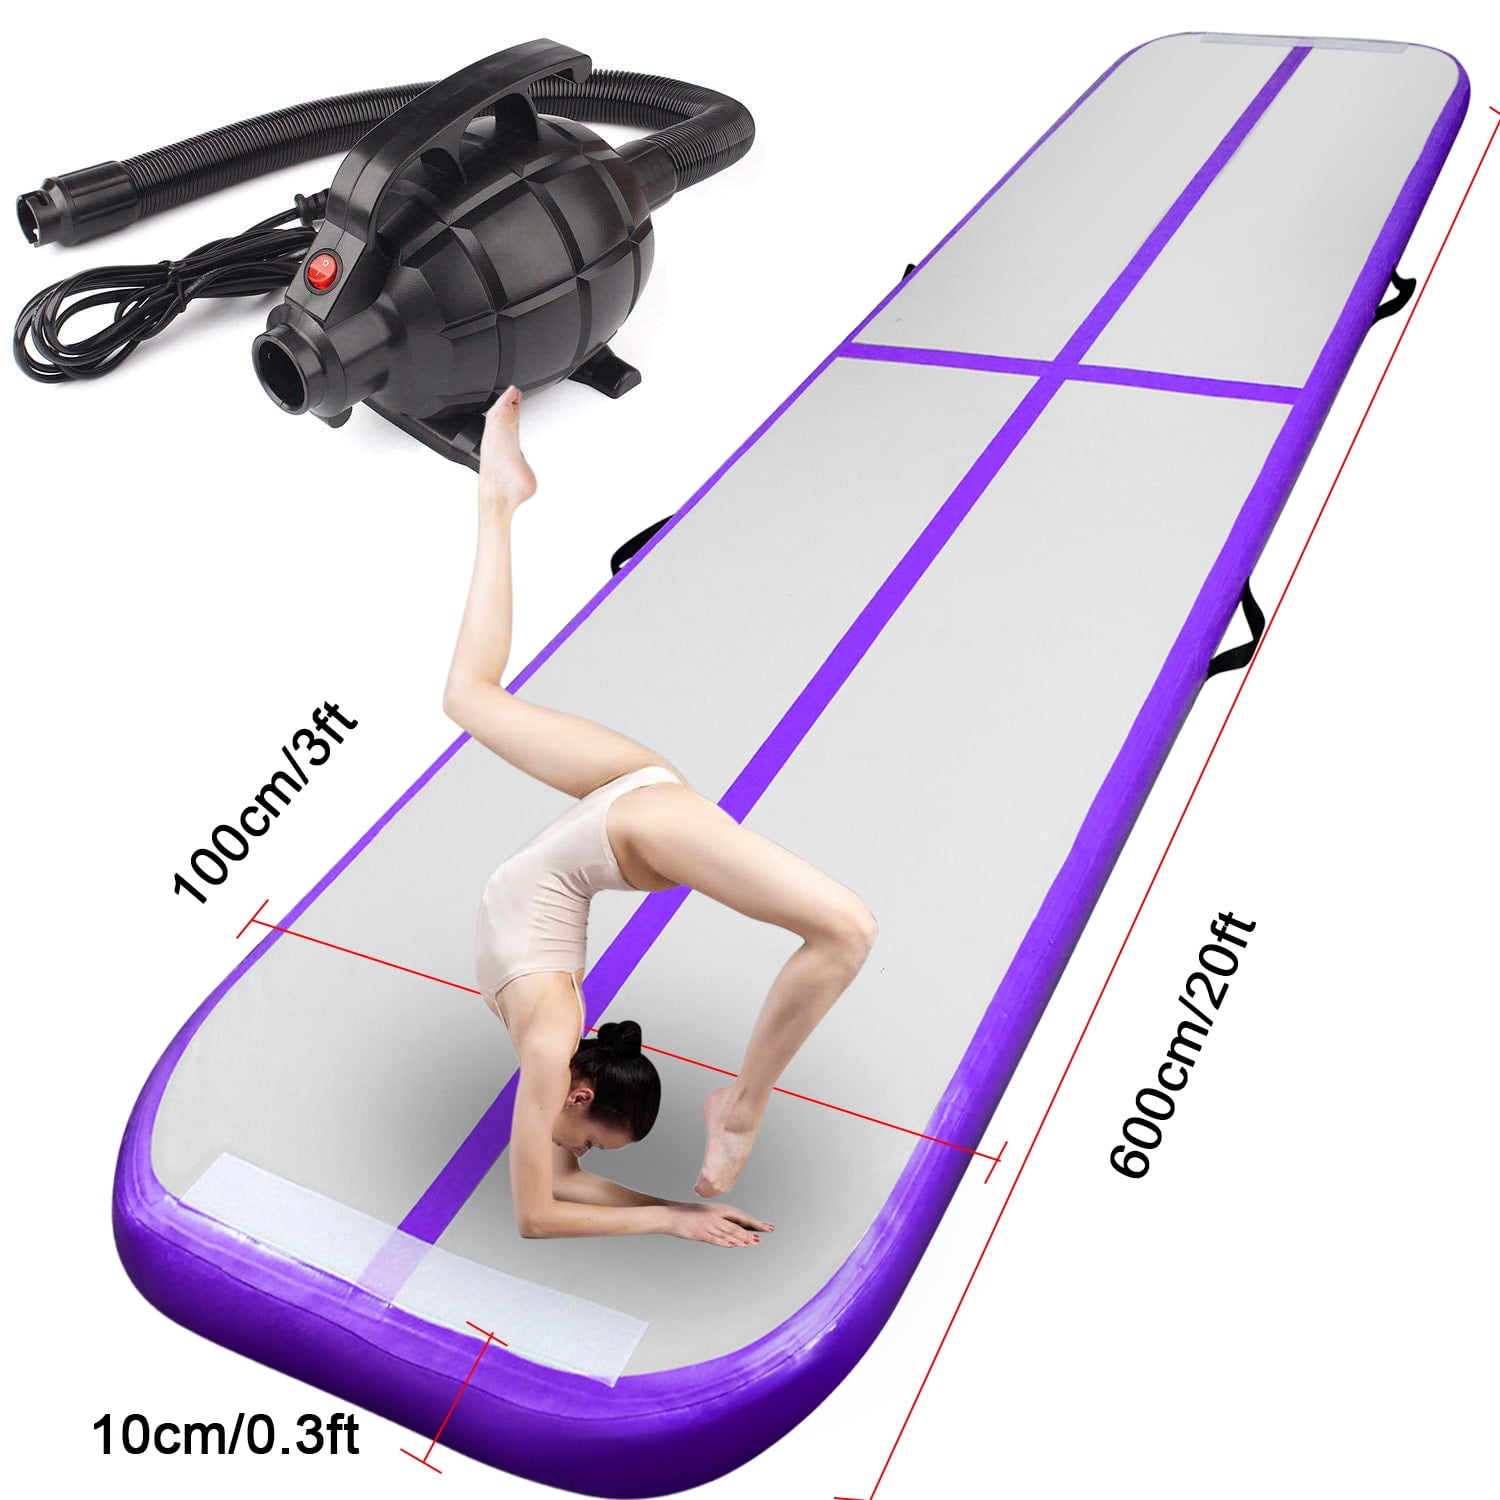 6m Inflatable Air Track Tumbling Gymnastics Mats Floor Tumble Training with Pump 